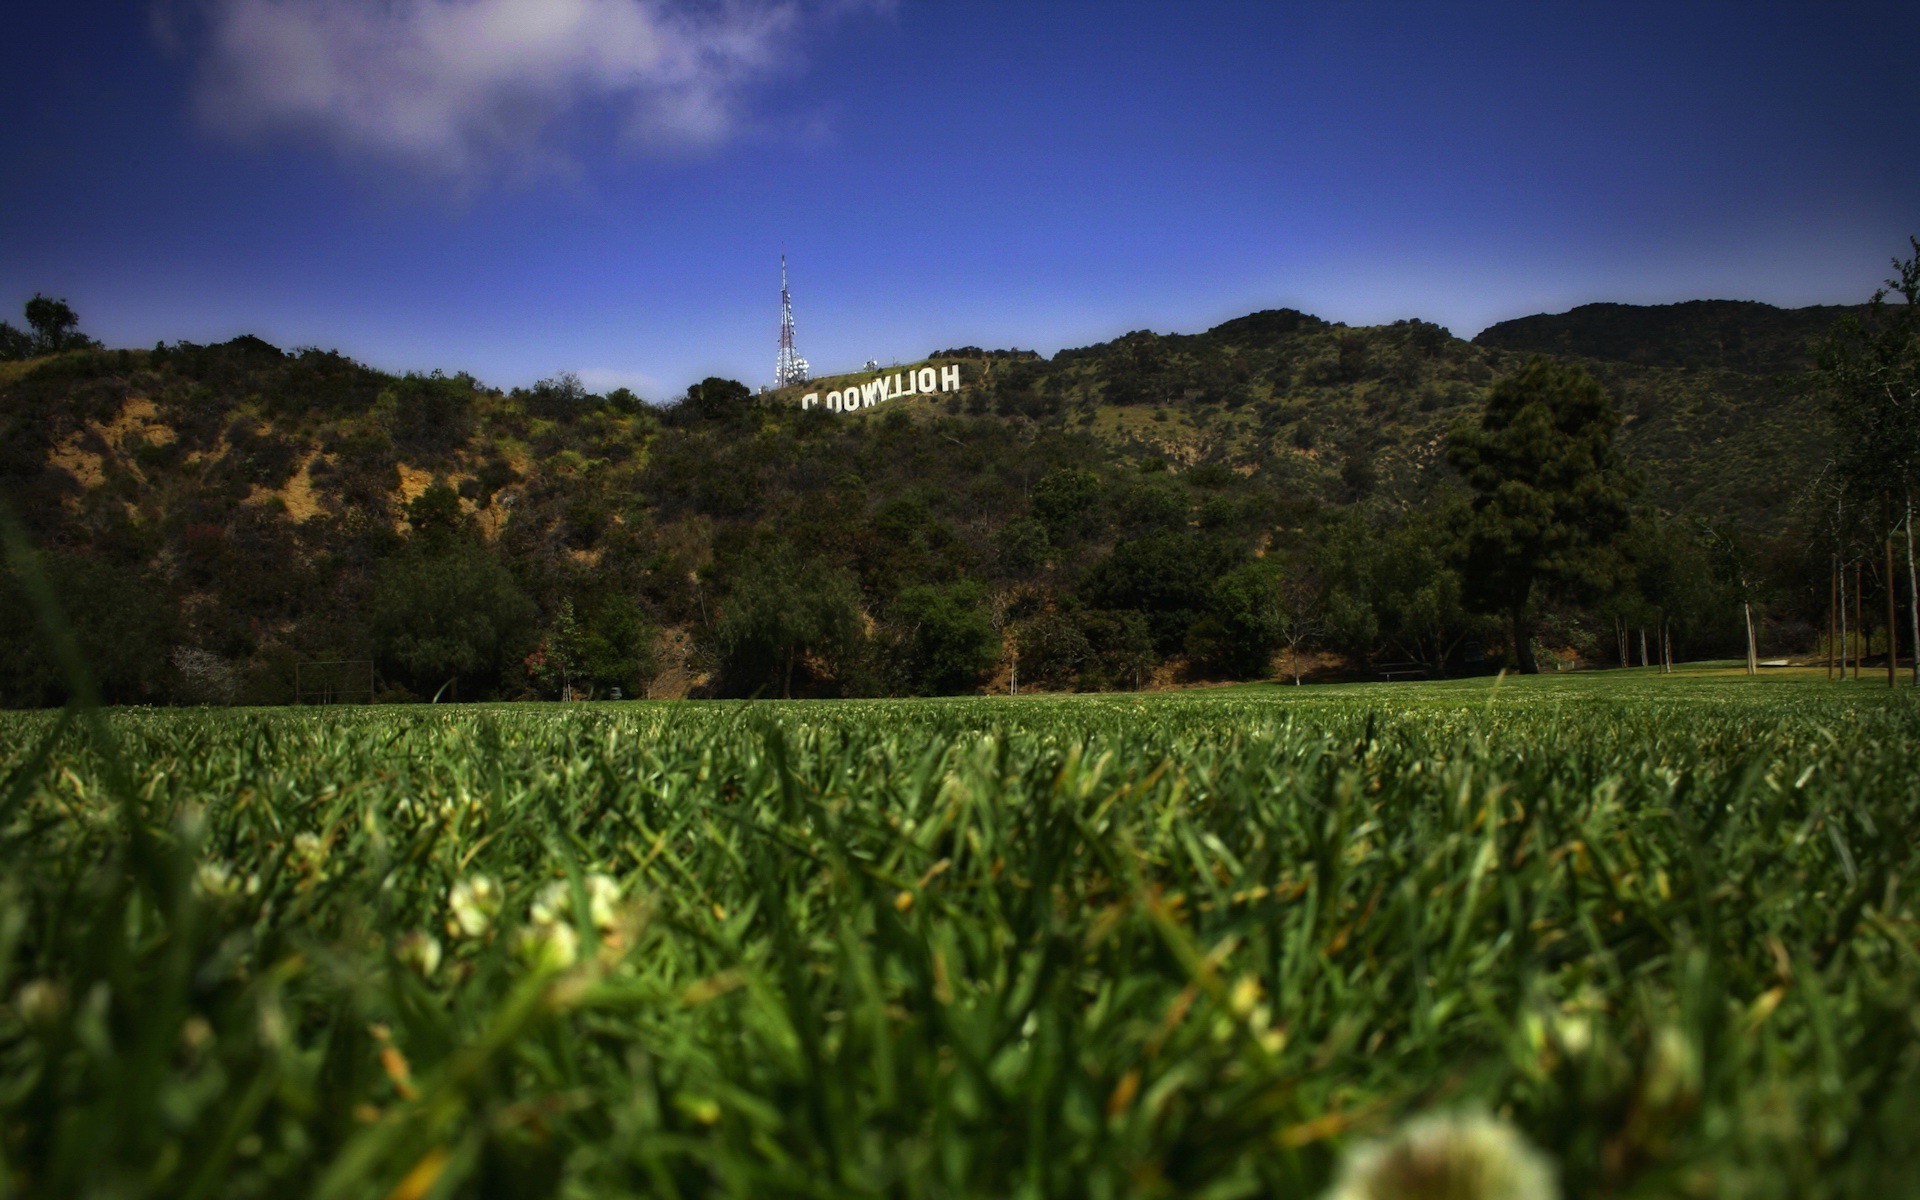 landscape, Worms Eye View, Grass, Hollywood, Signs, Hill, California Wallpaper